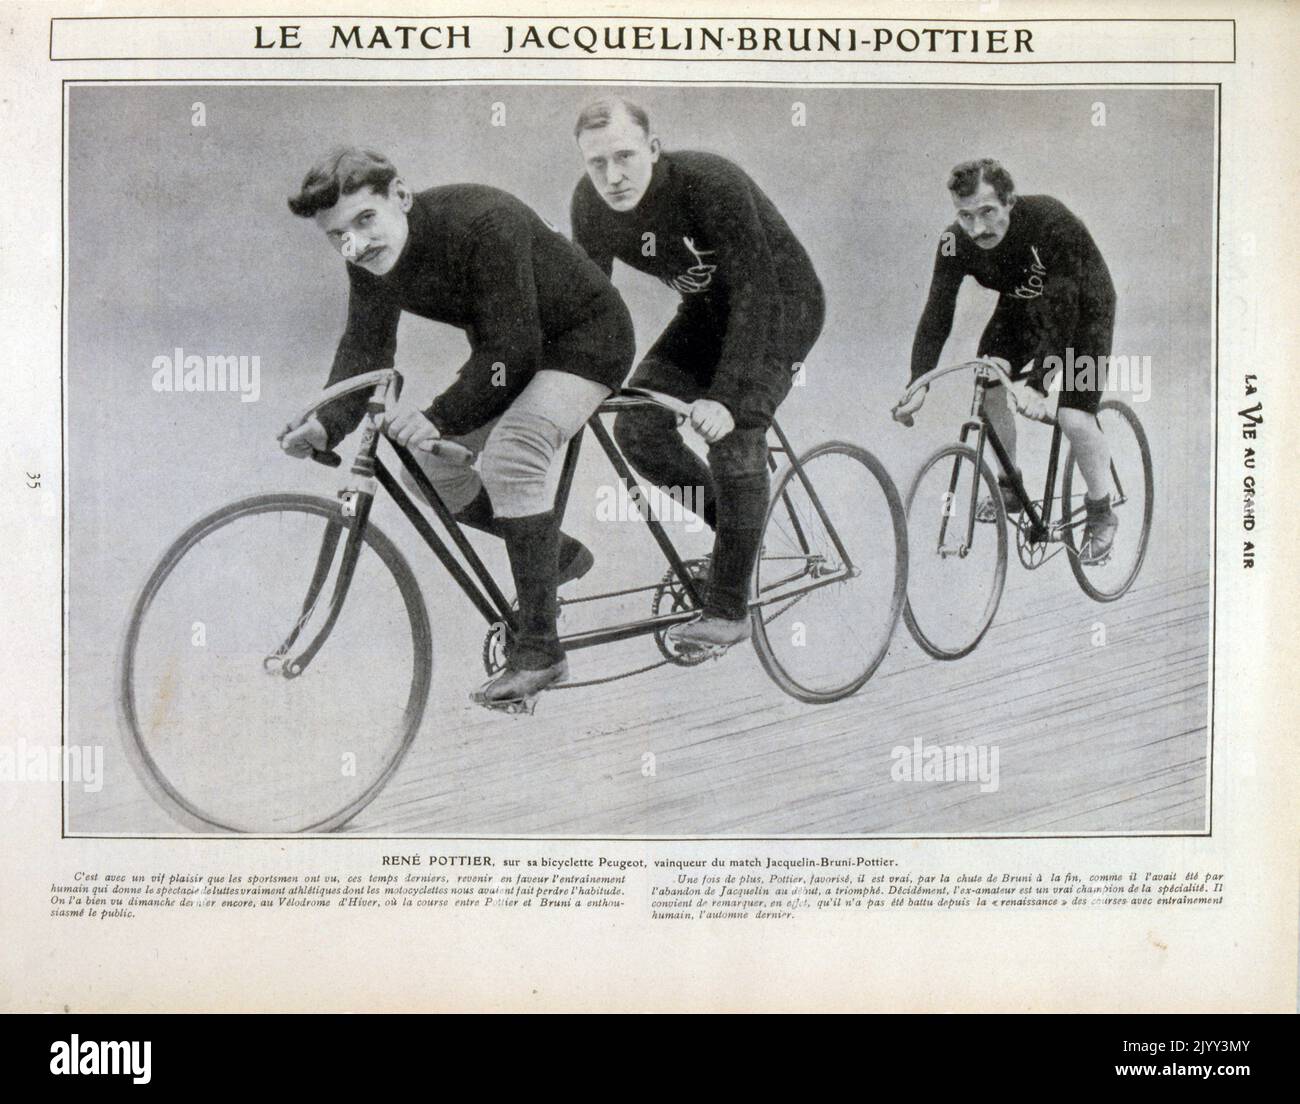 Rene Pottier (1879 - 1907), French racing cyclist (left with moustache); won Bordeaux-Paris in 1903 before turning professional. He came second in Paris-Roubaix 1905 and Bordeaux-Paris 1905, then third in 1906's Paris-Roubaix, before winning the Tour de France in 1906. Stock Photo